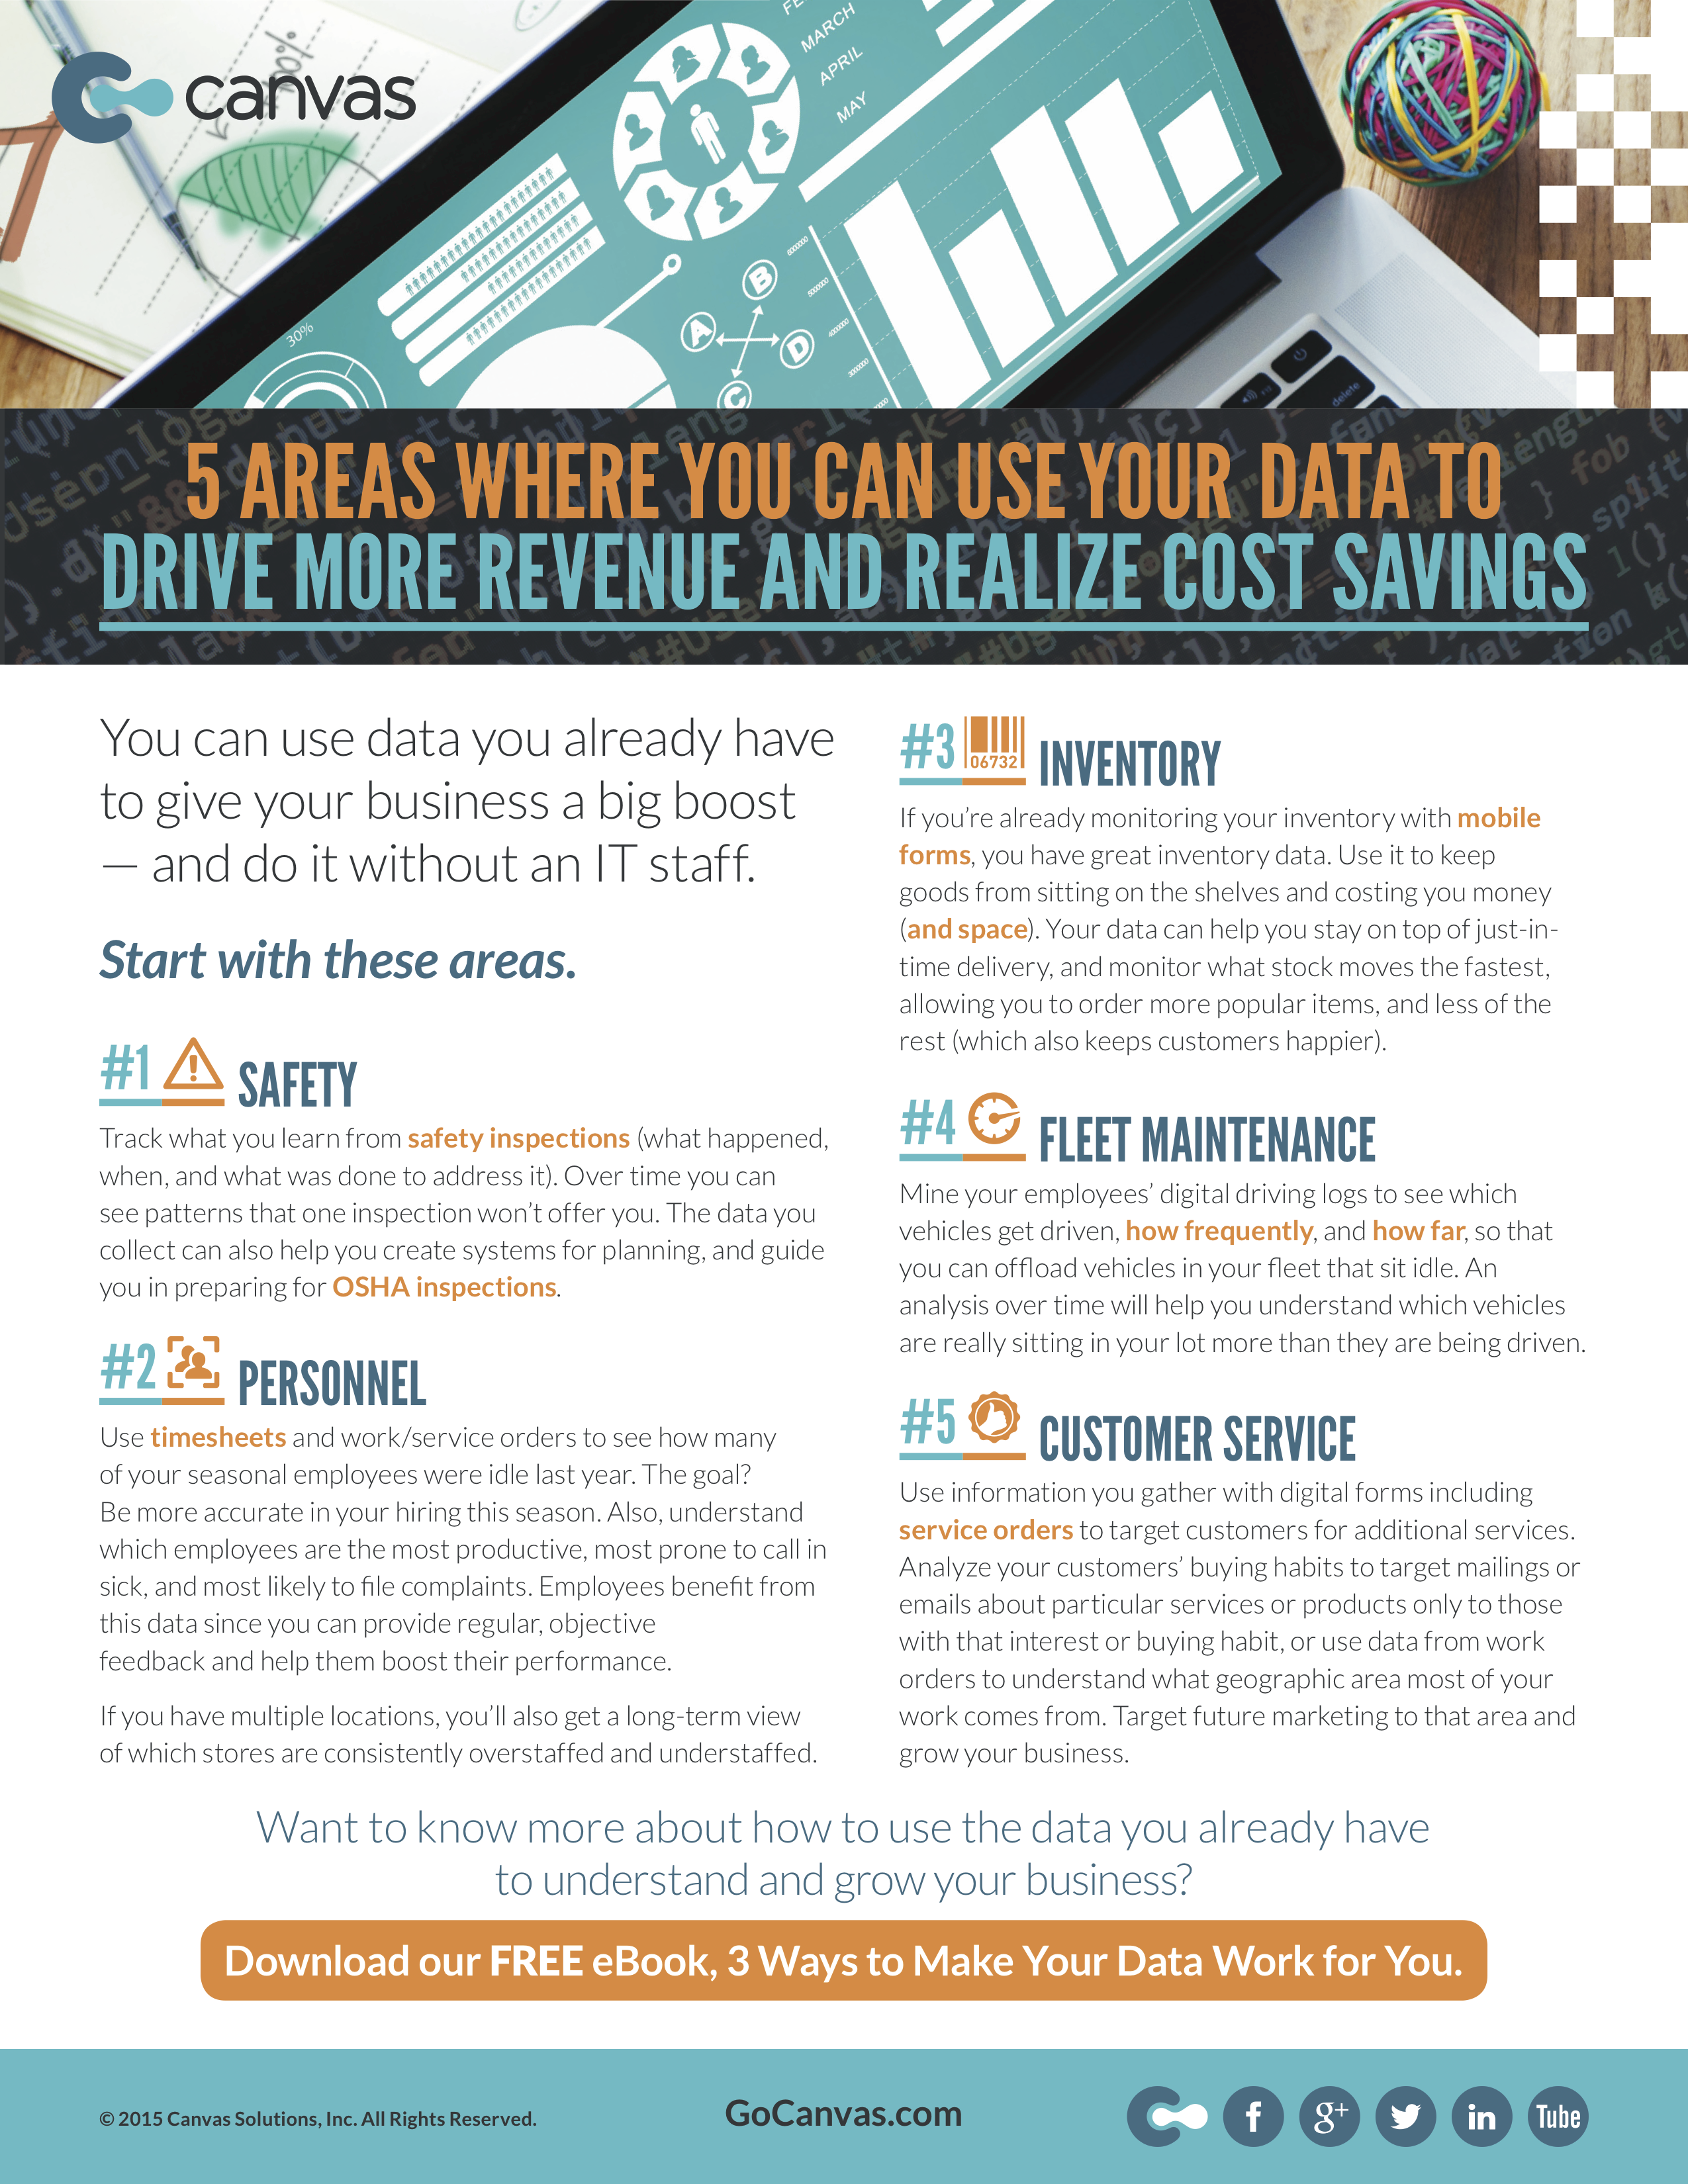 5 Areas Where You Can Use Your Data to Drive More Revenue and Realize Cost Savings